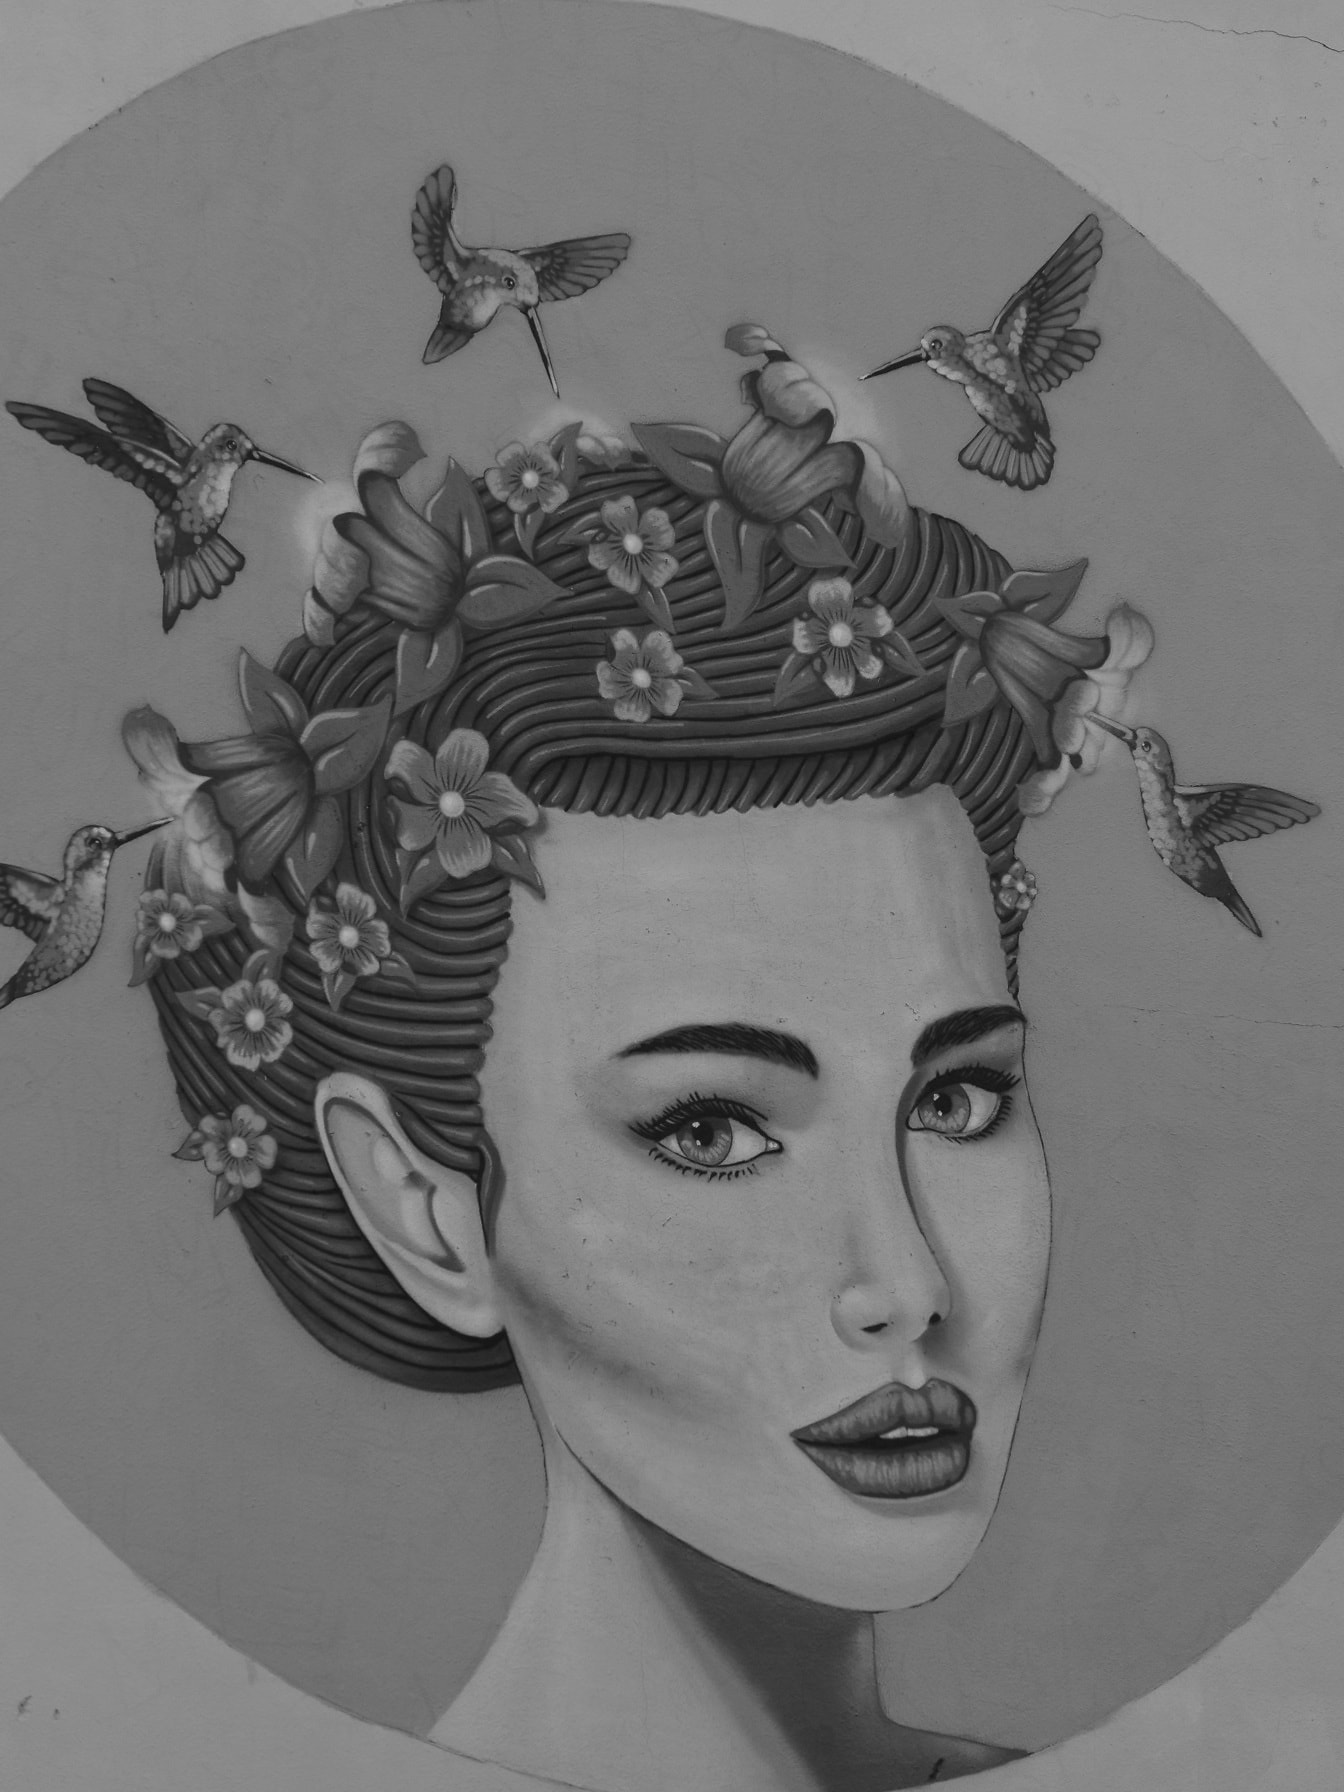 Greyscale graffiti of beautiful women with flowers and hummingbirds in hair